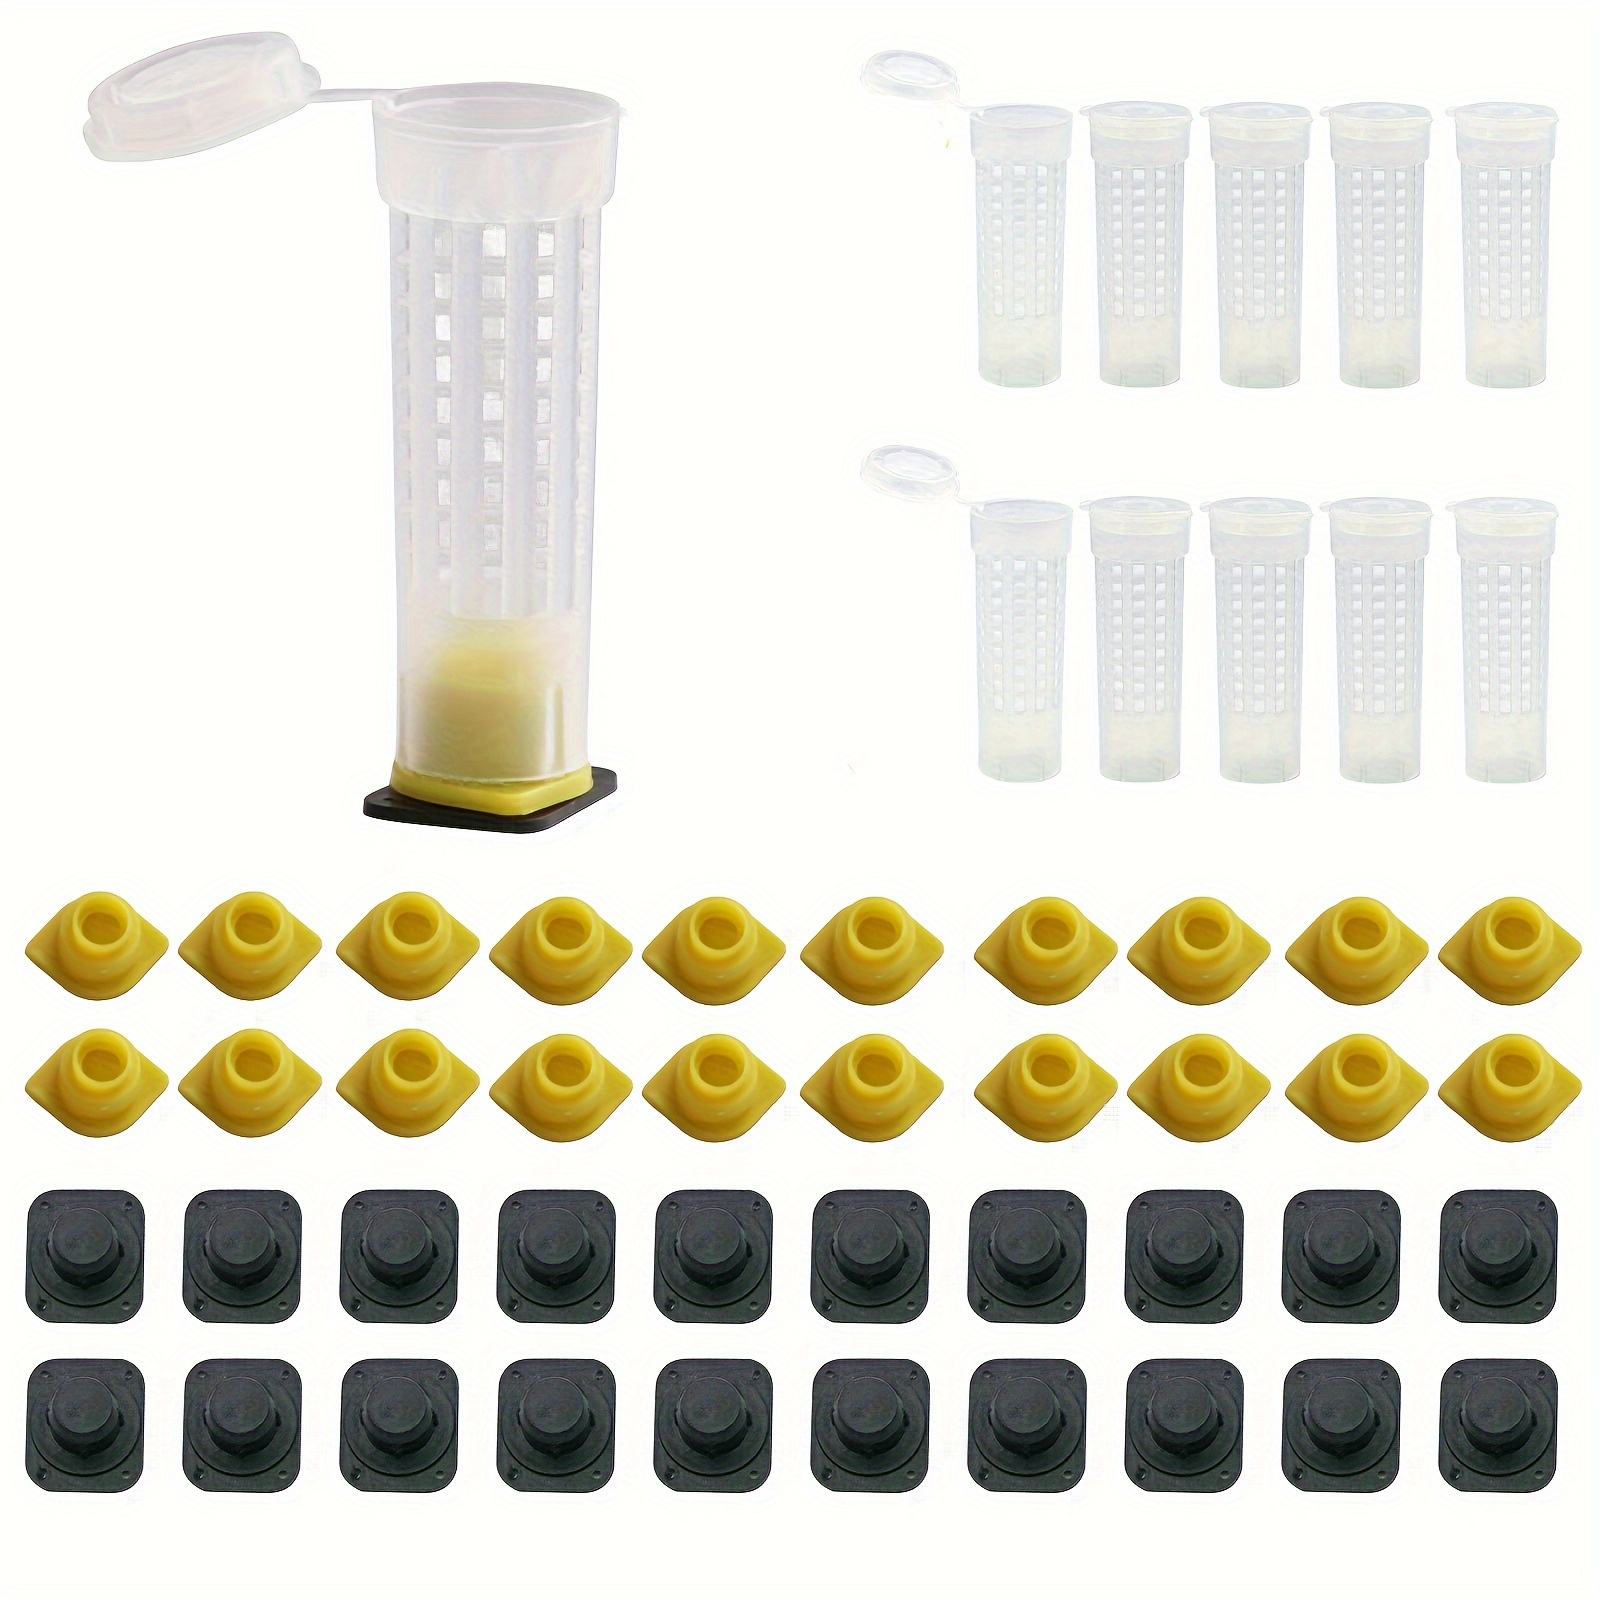 

20 Sets, Lucky Farm Bee Queen Cage Rearing Cup, Beekeeping Equipment Insects Tools